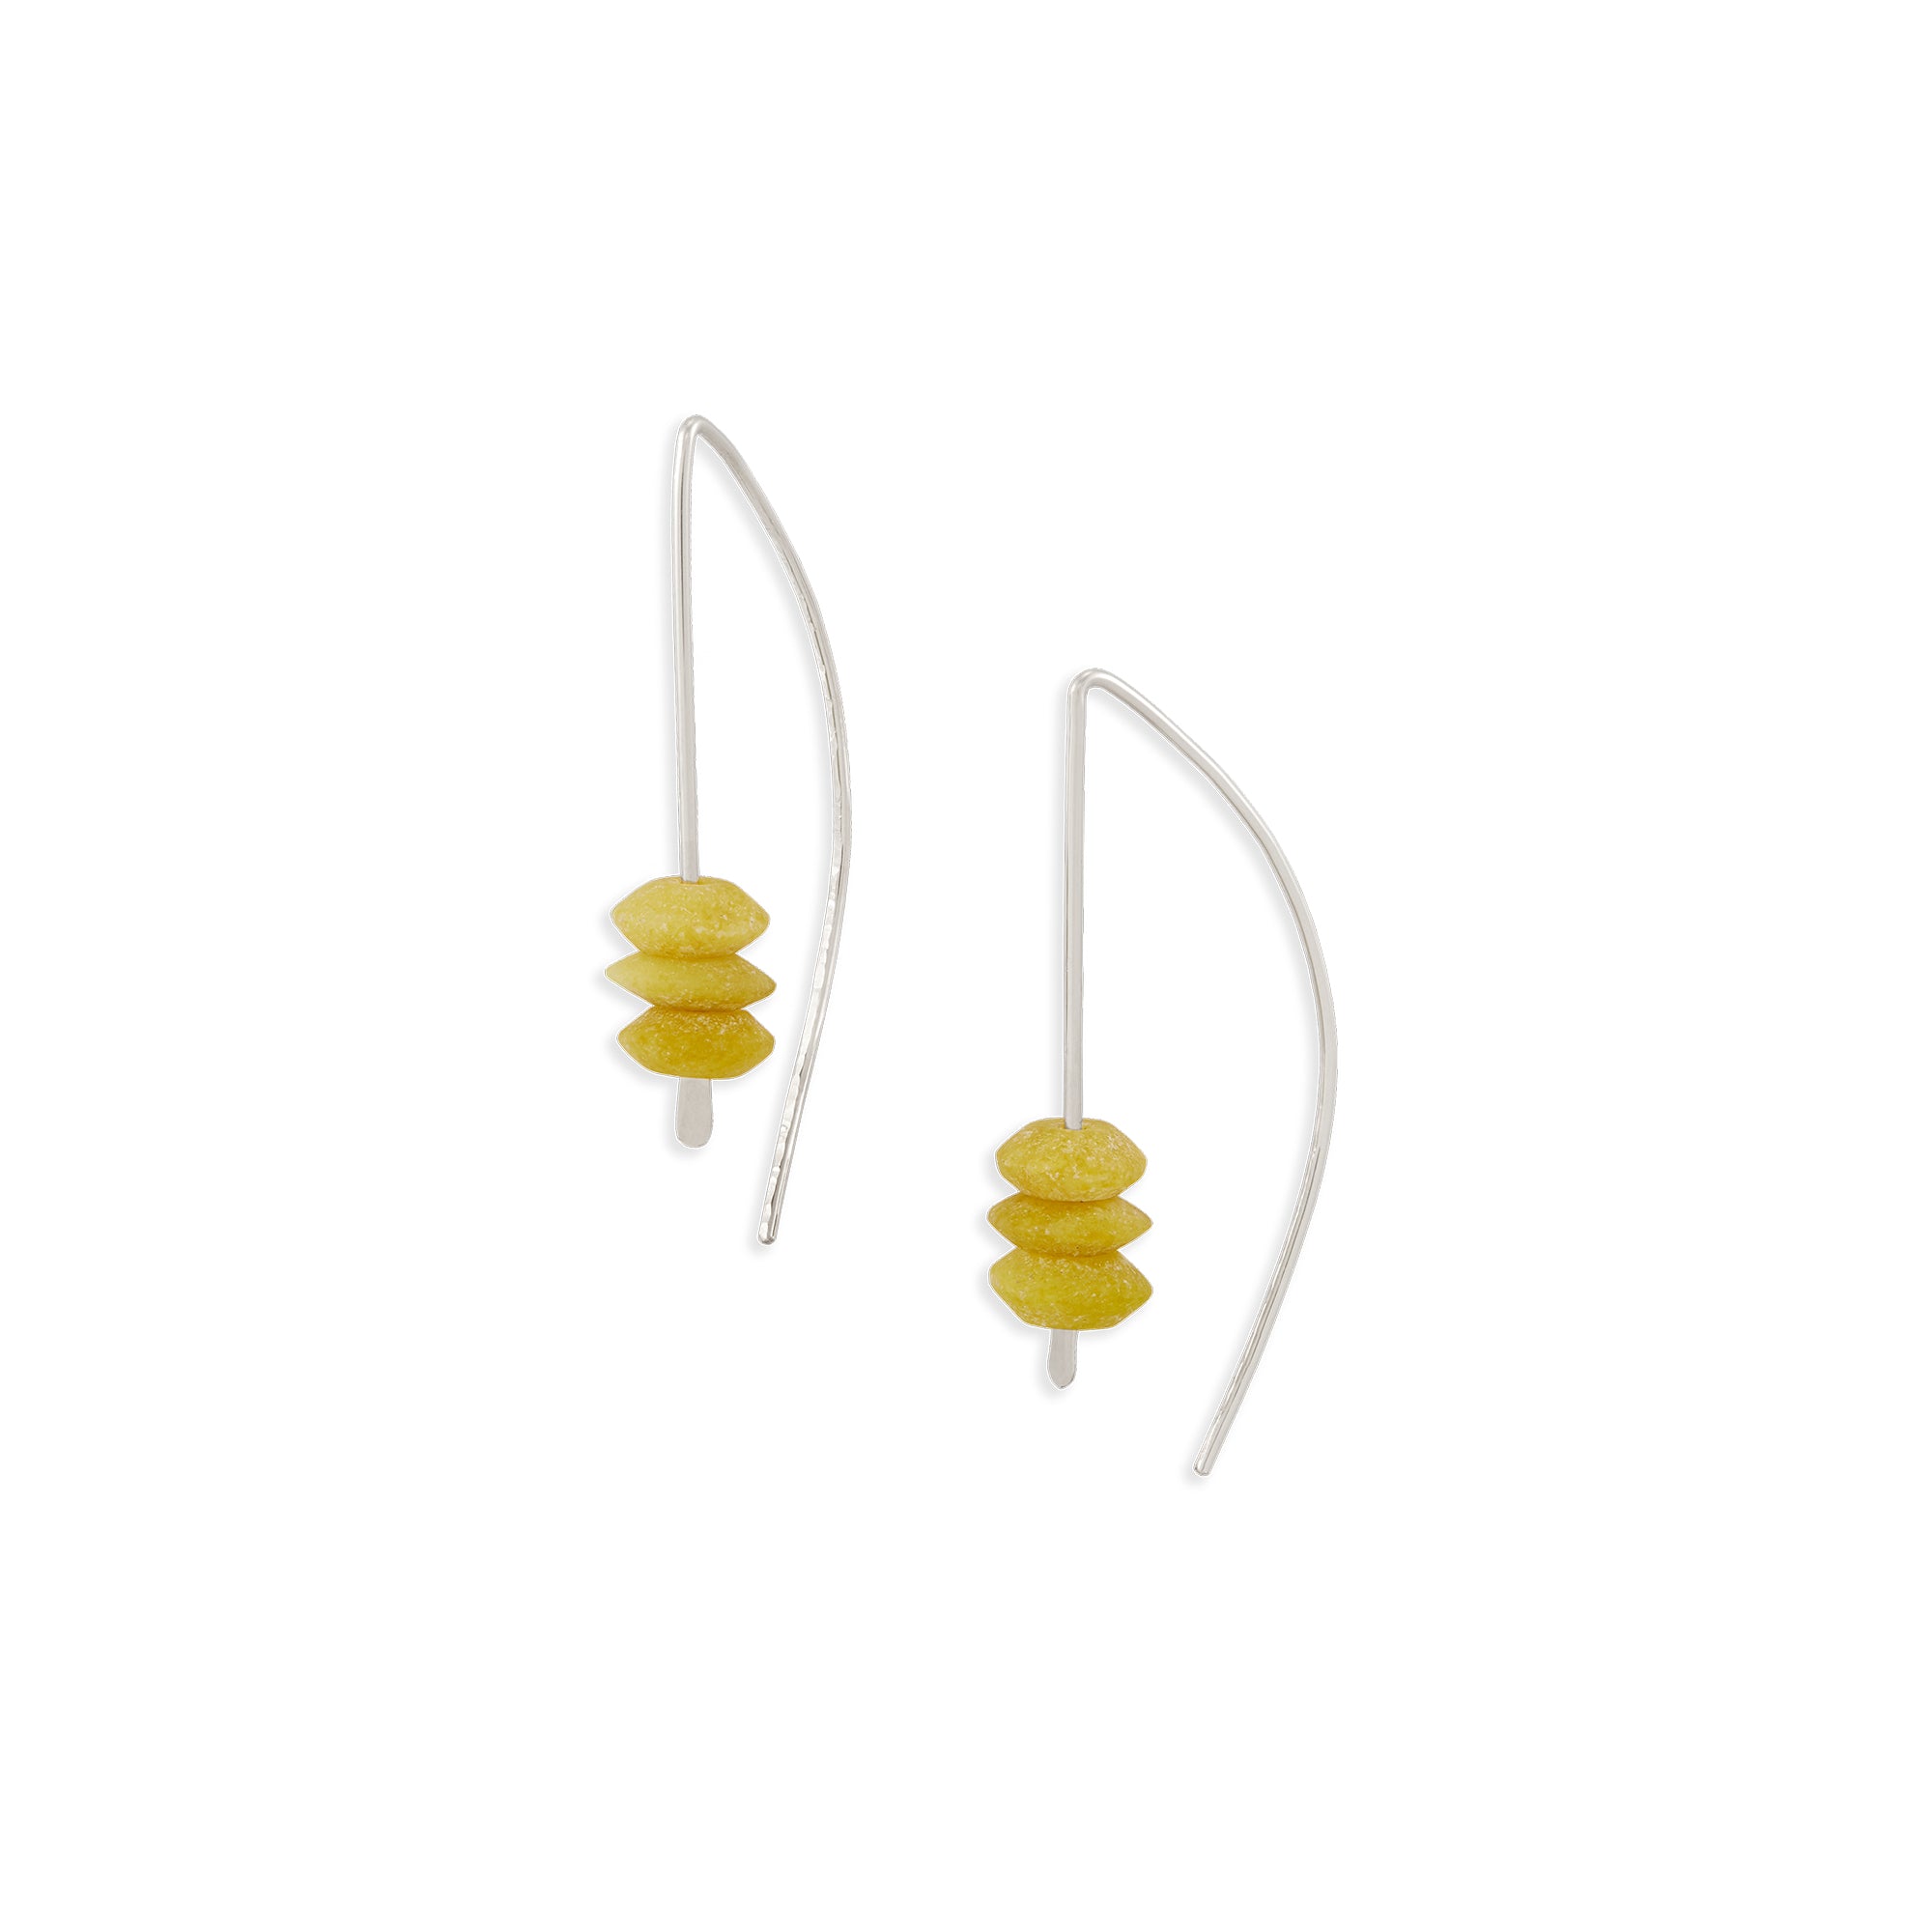 A modern threader earring with a pop of color from semi-precious onyx stones, the arch earring is sure to be a staple piece.